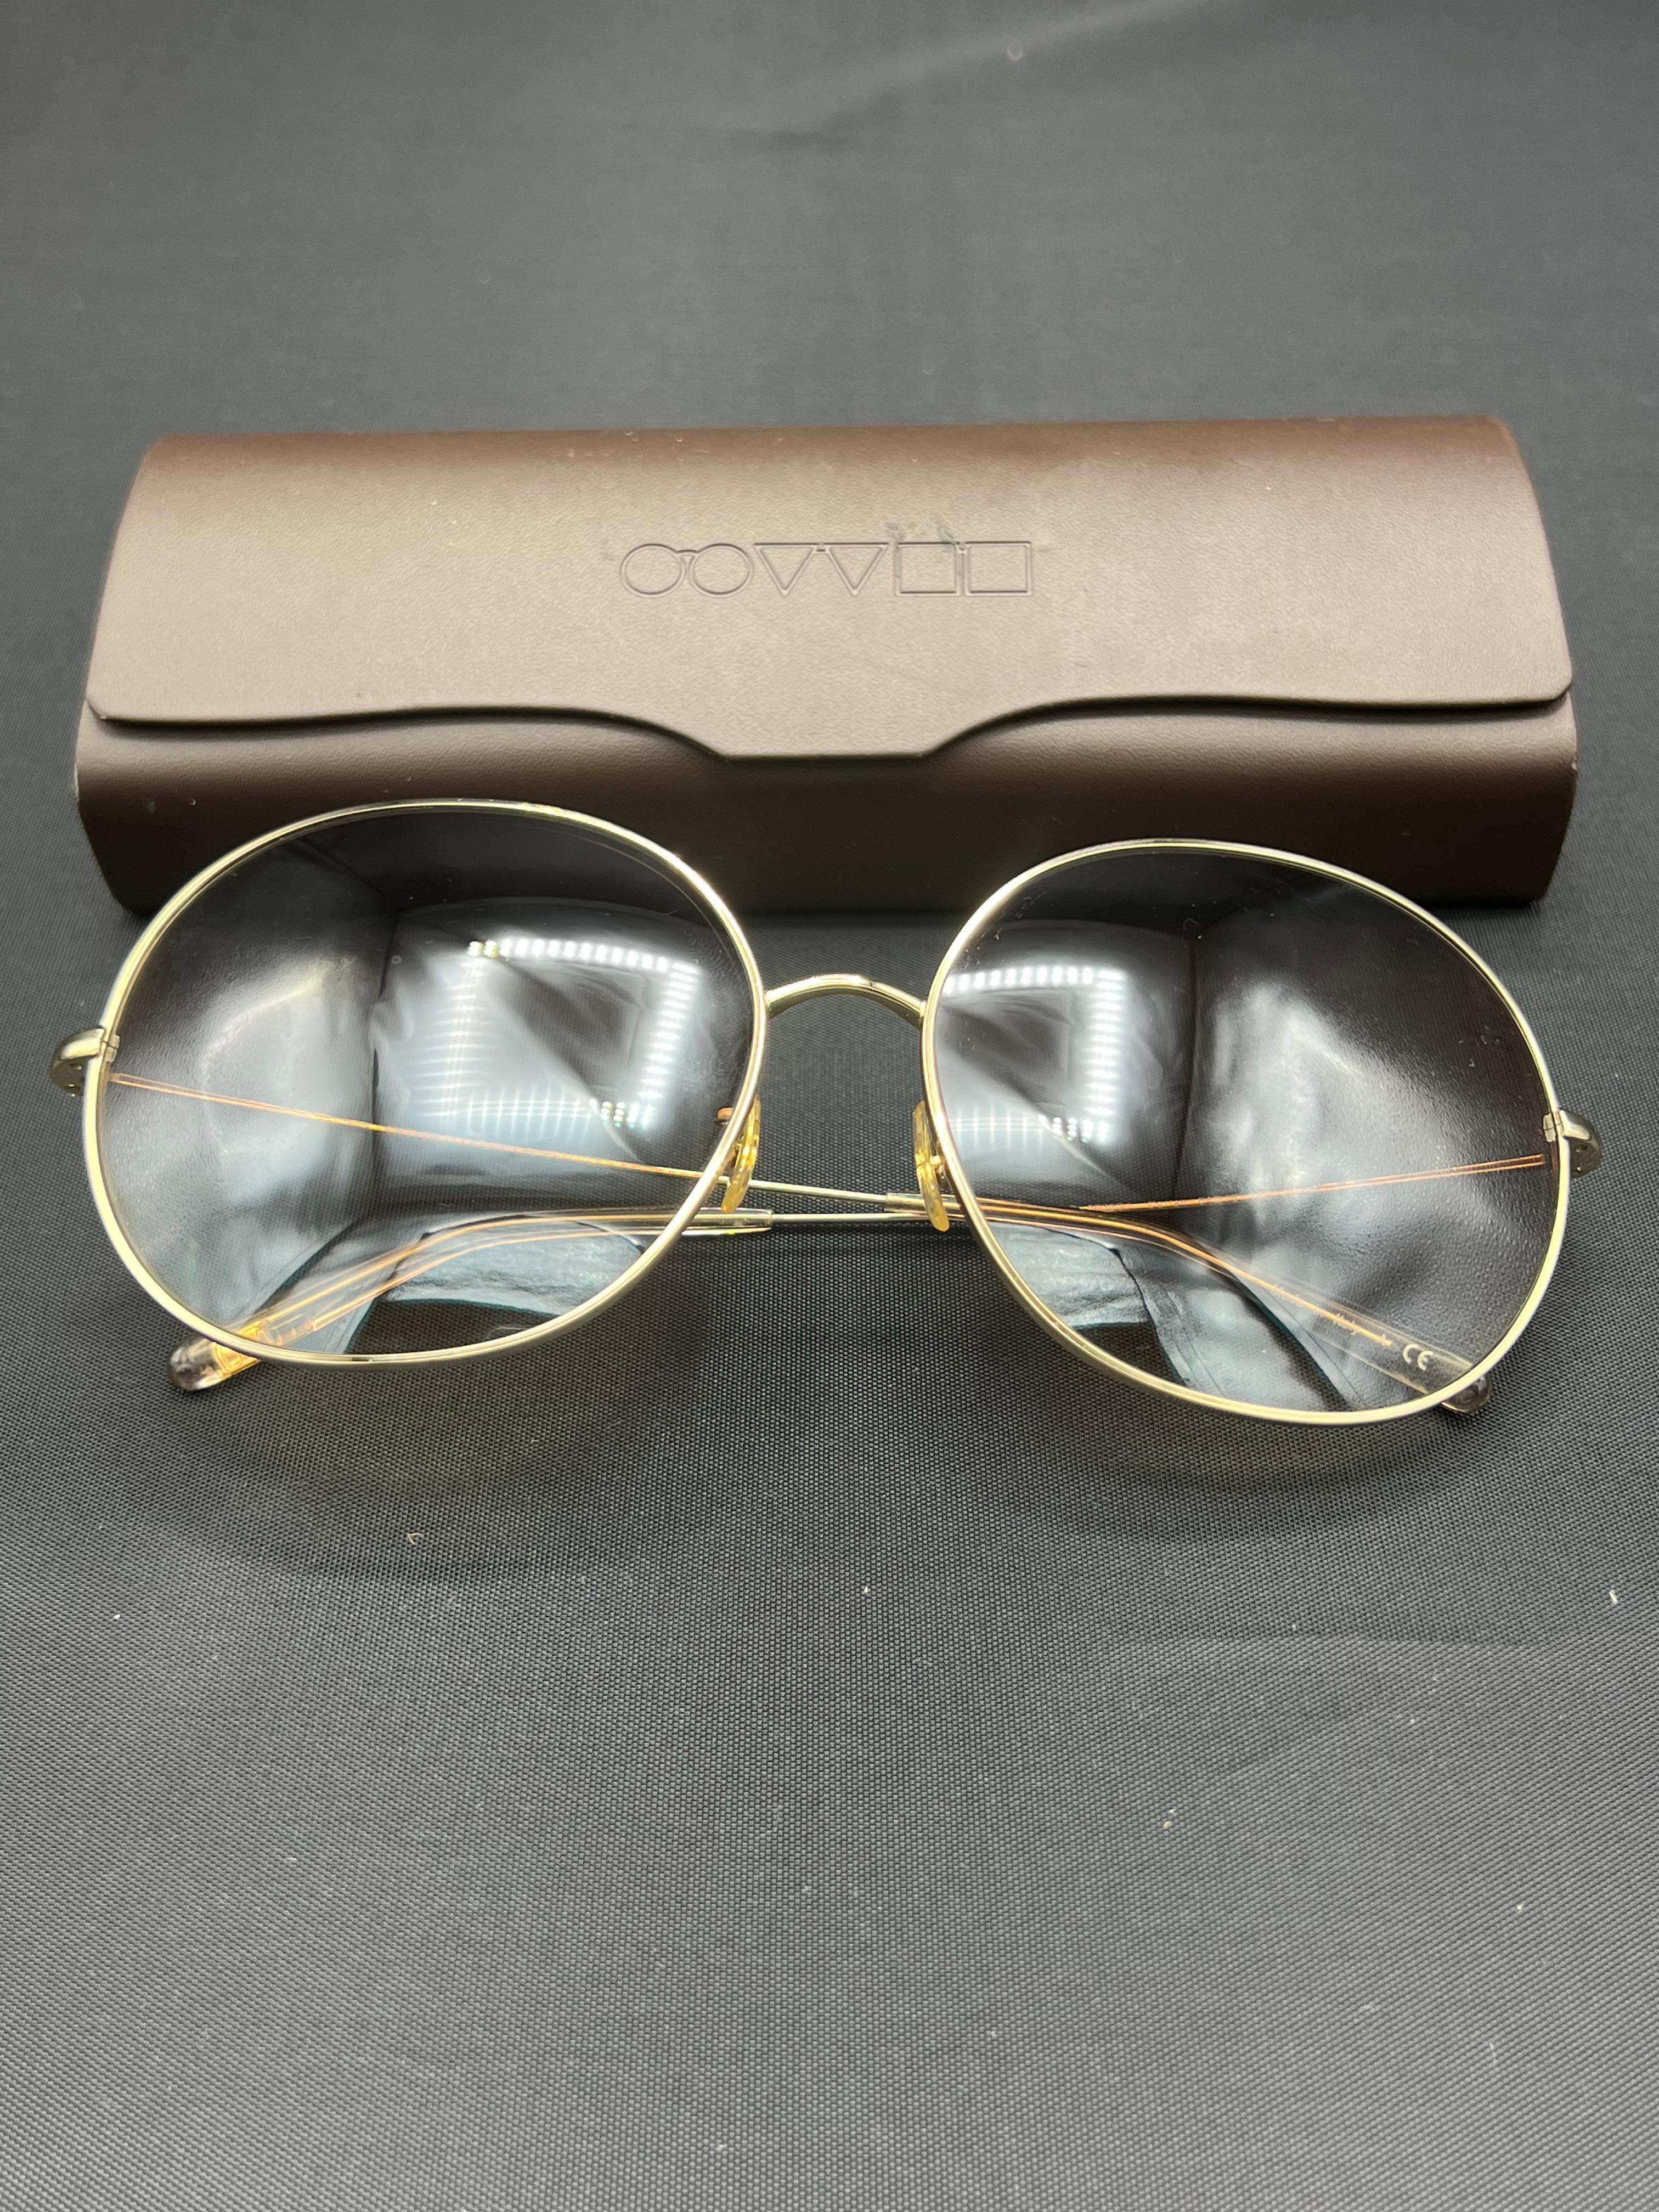 Oliver Peoples Darien Brown Round Sunglasses w/ Case For Sale 5